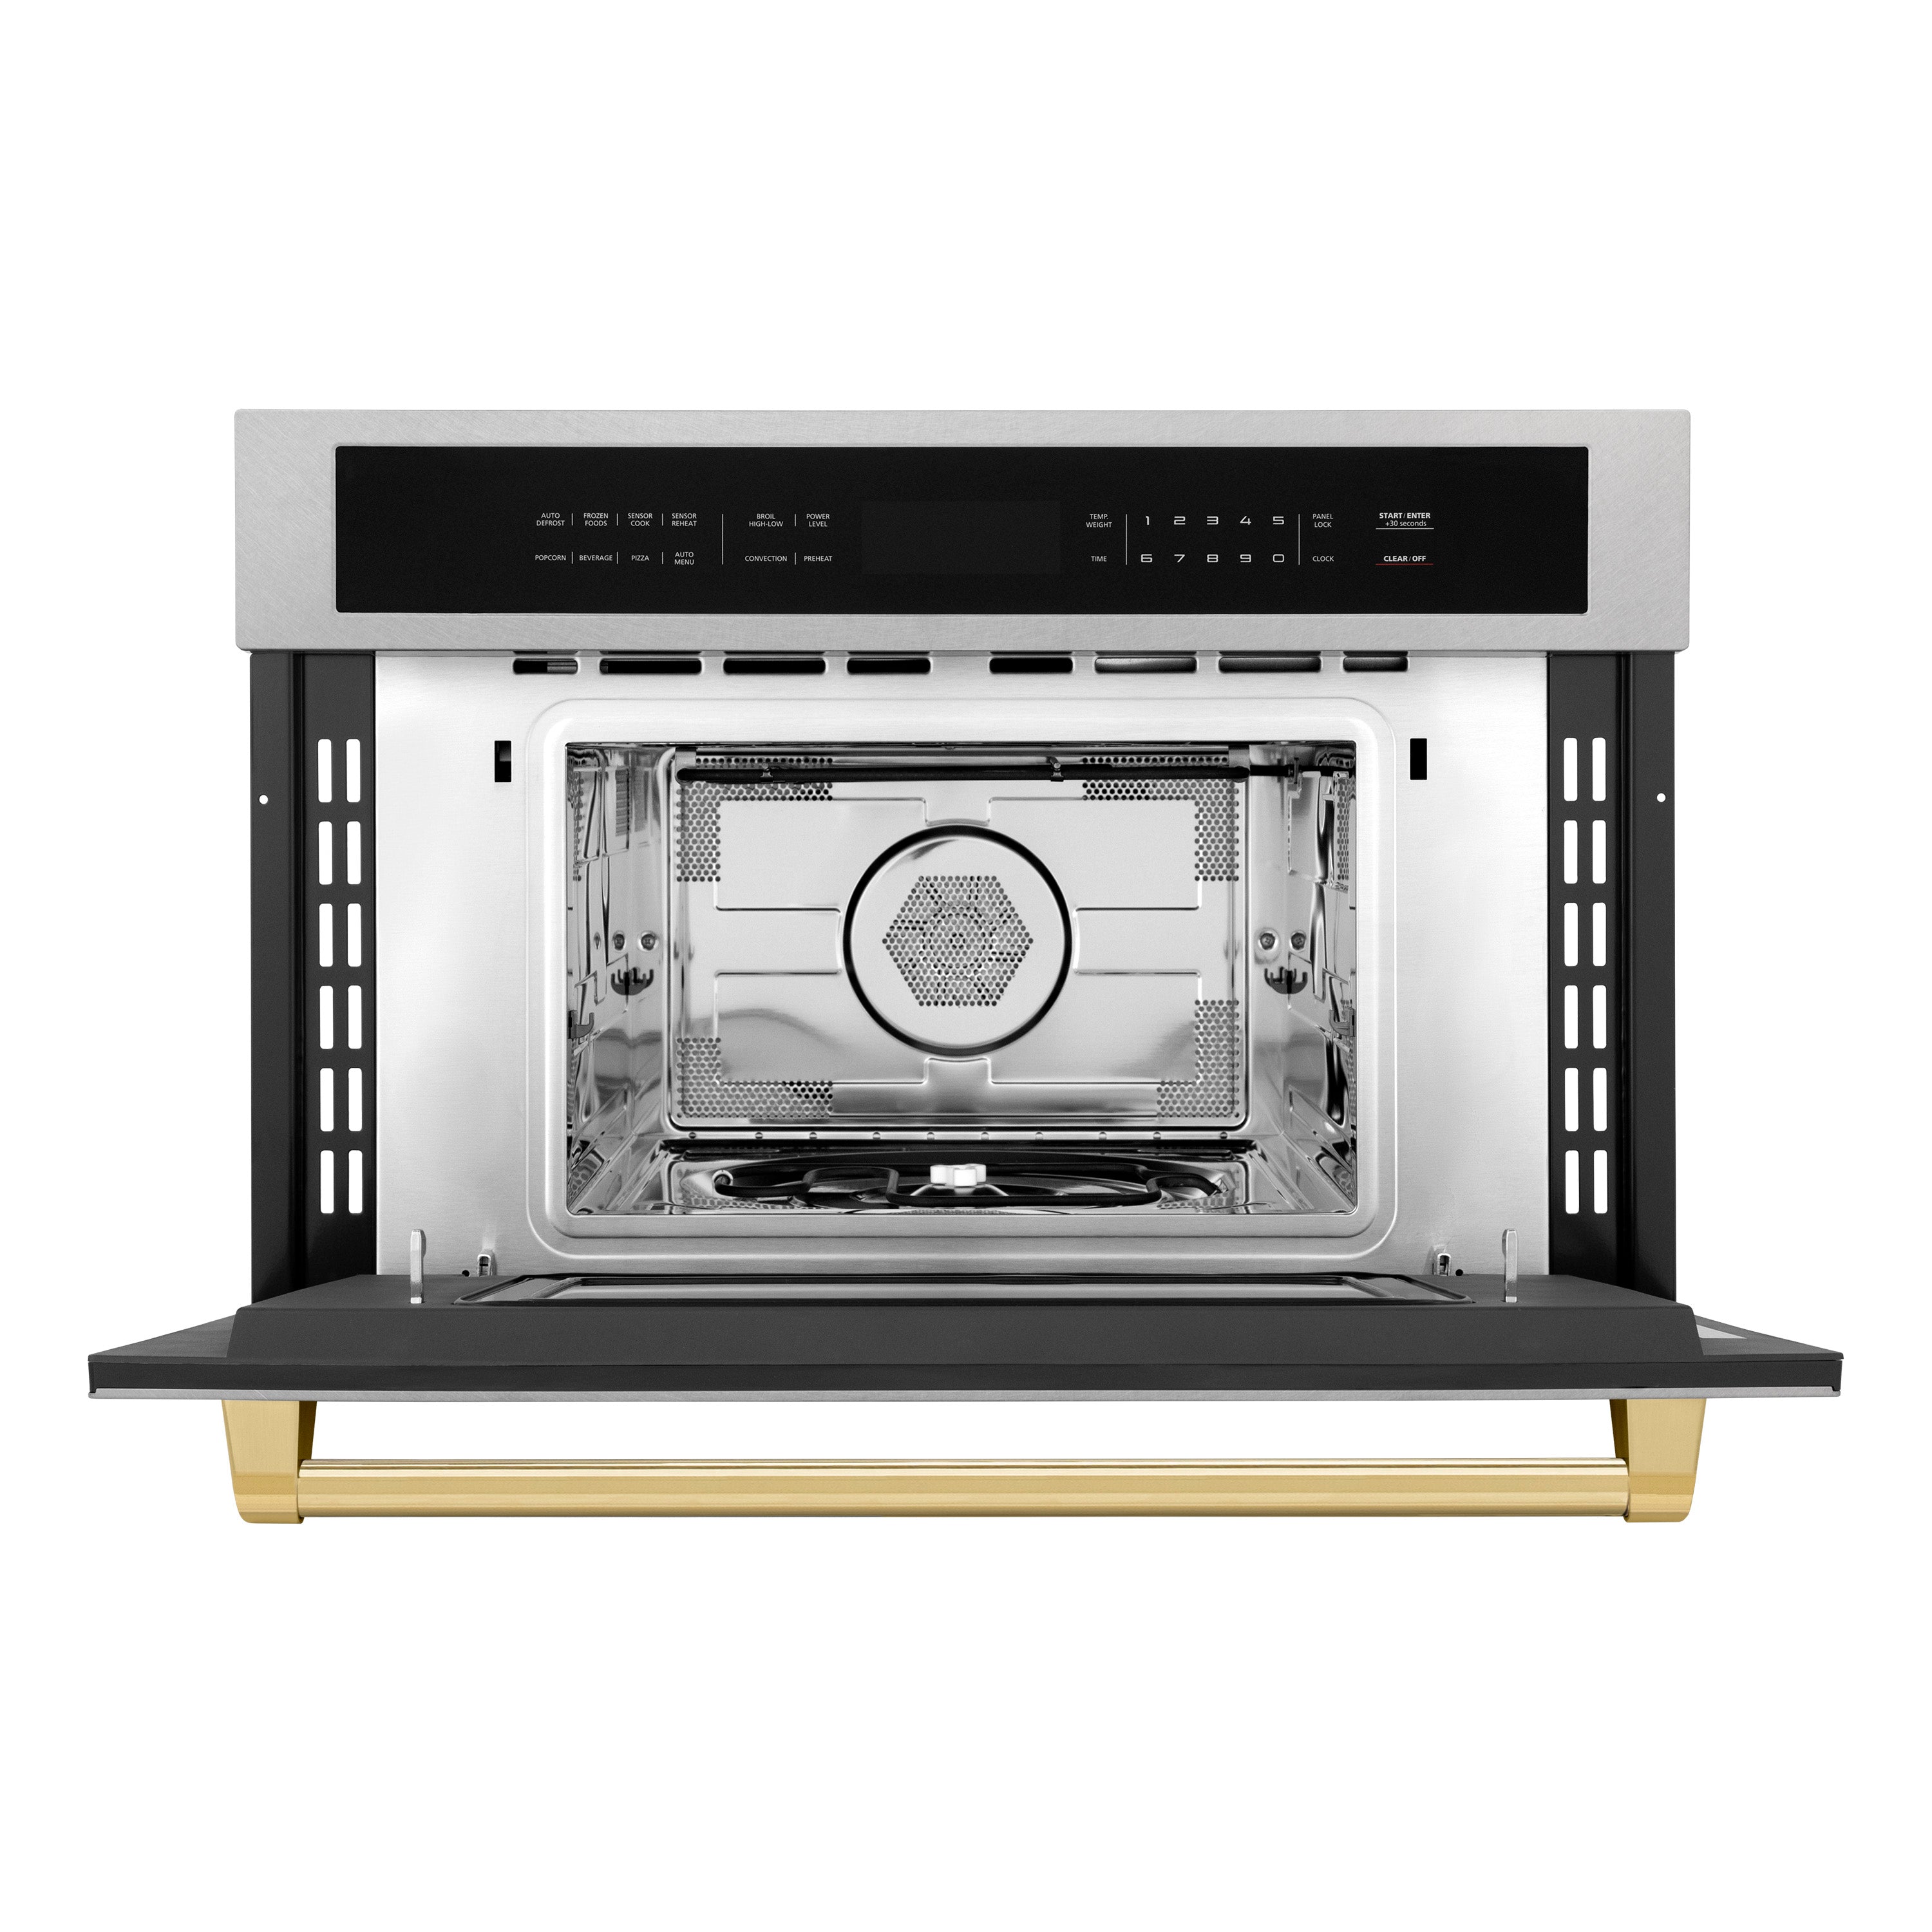 ZLINE Autograph Edition 30” 1.6 cu ft. Built-in Convection Microwave Oven in Fingerprint Resistant Stainless Steel and Polished Gold Accents (MWOZ-30-SS-G